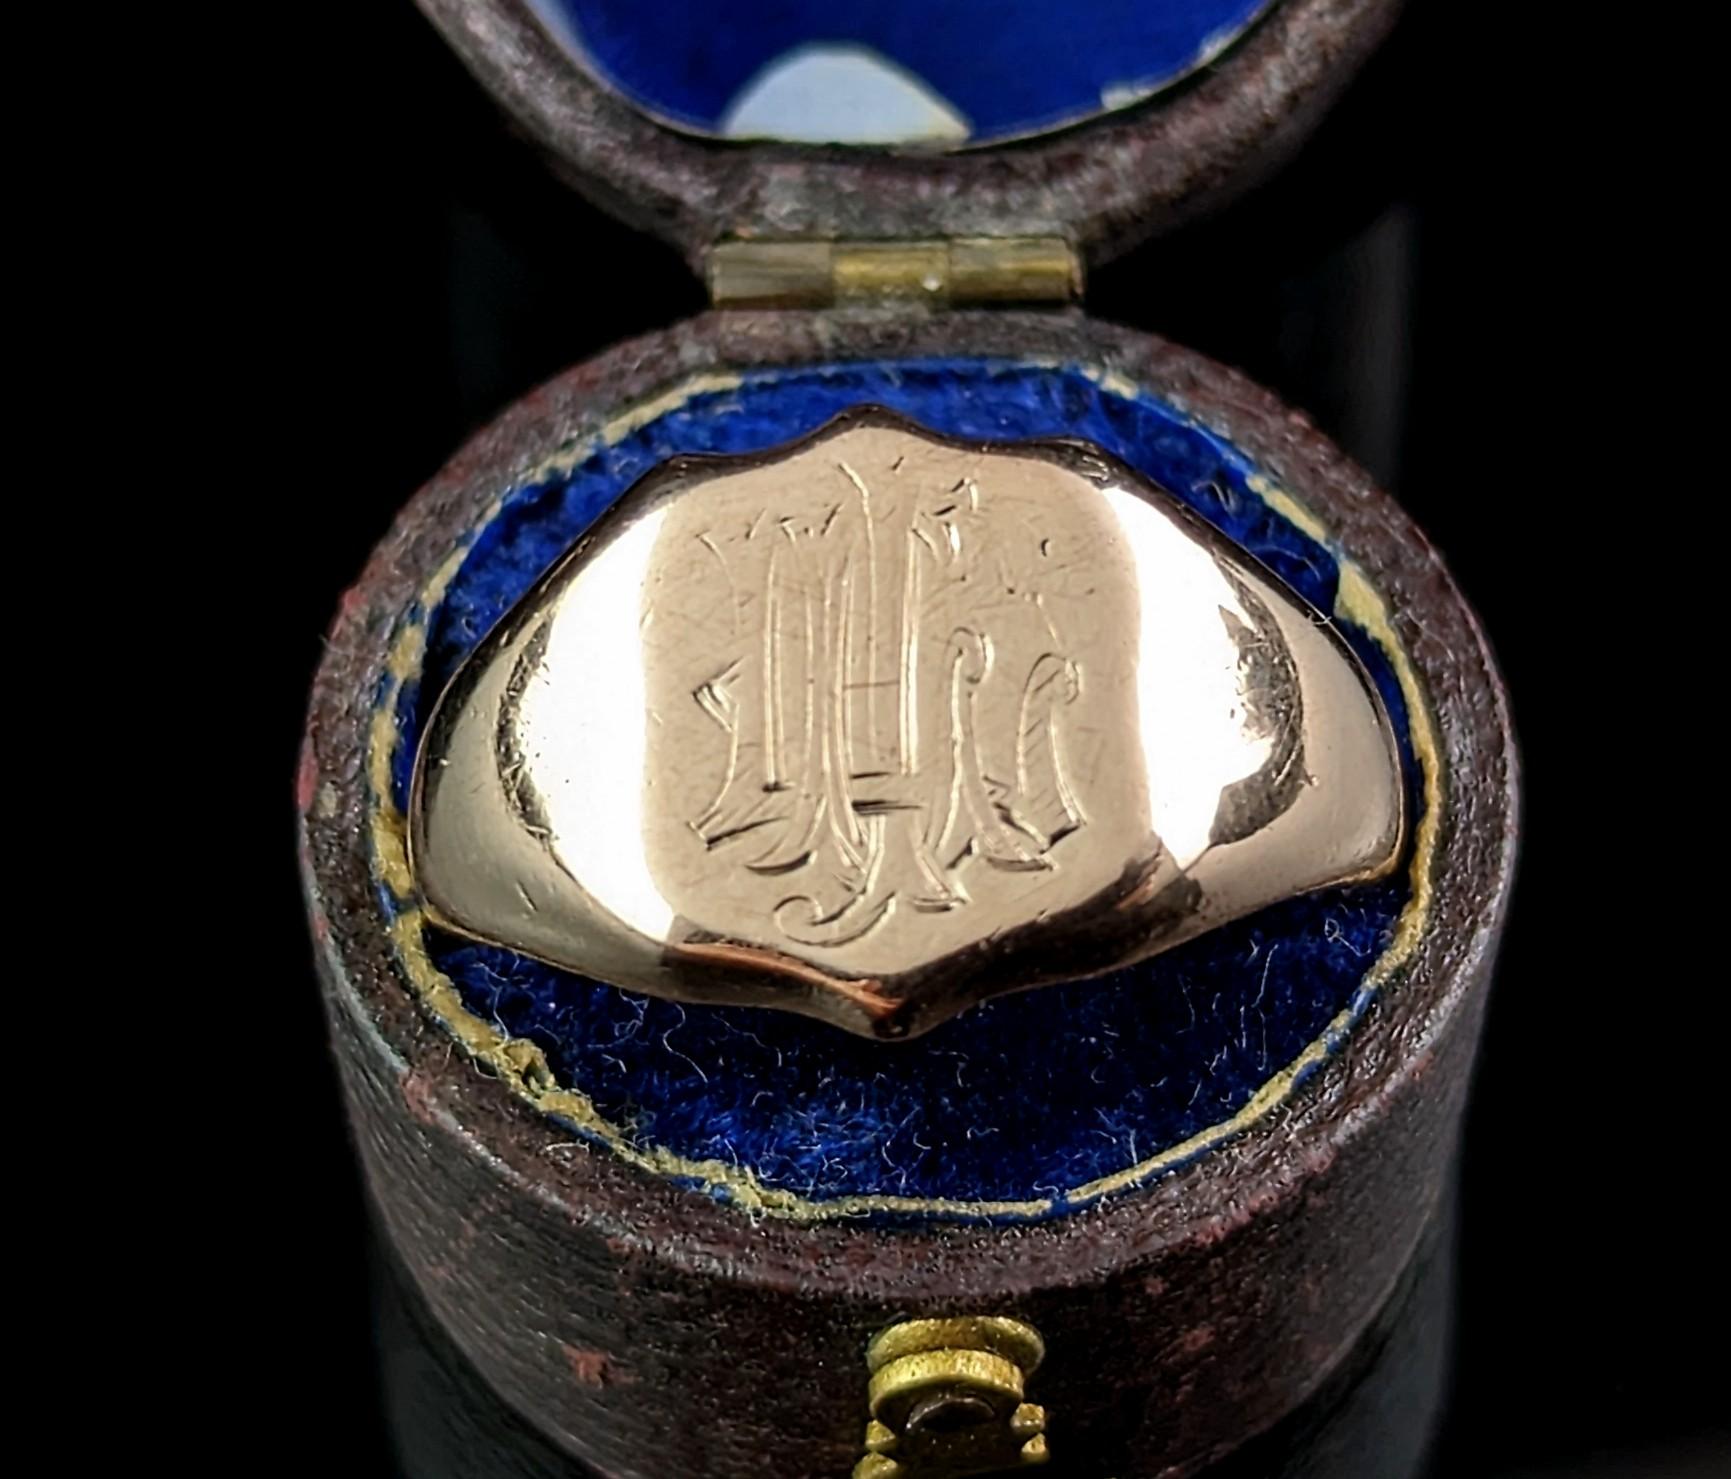 This handsome antique 9kt Rose gold signet ring has a warm cherished charm about it.

It has a shield shaped face with an engraved monogram of initials, this is a little worn but it could be LCI or similar in a gothic type script.

It has a rich,